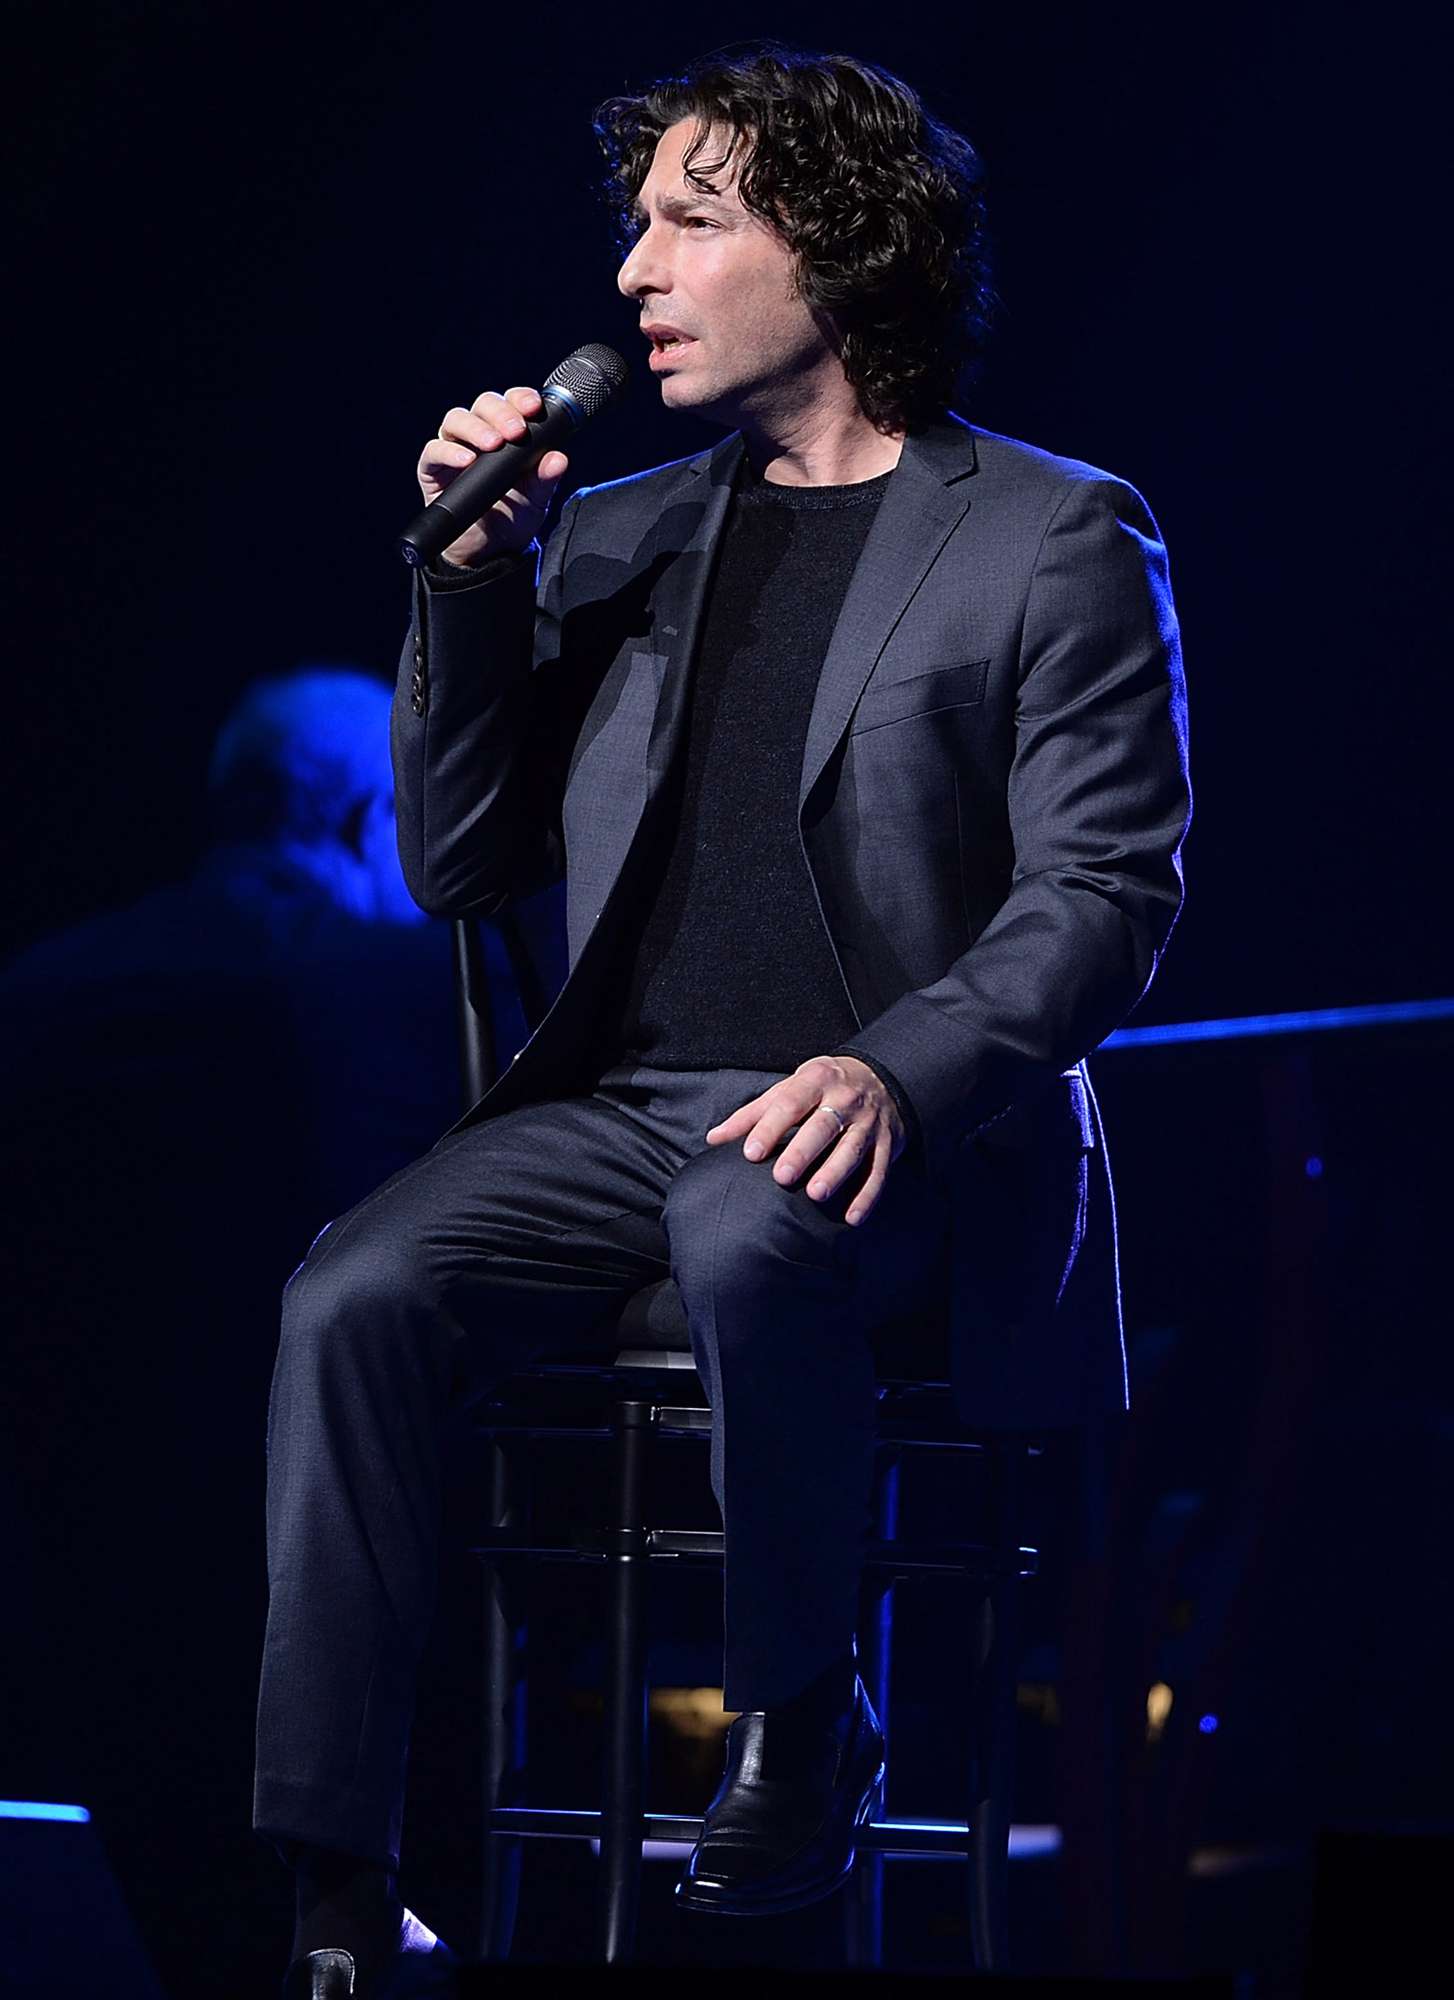 Jason Gould (Barbra Streisand's son) performs on stage in concert at O2 Arena on June 1, 2013 in London, England